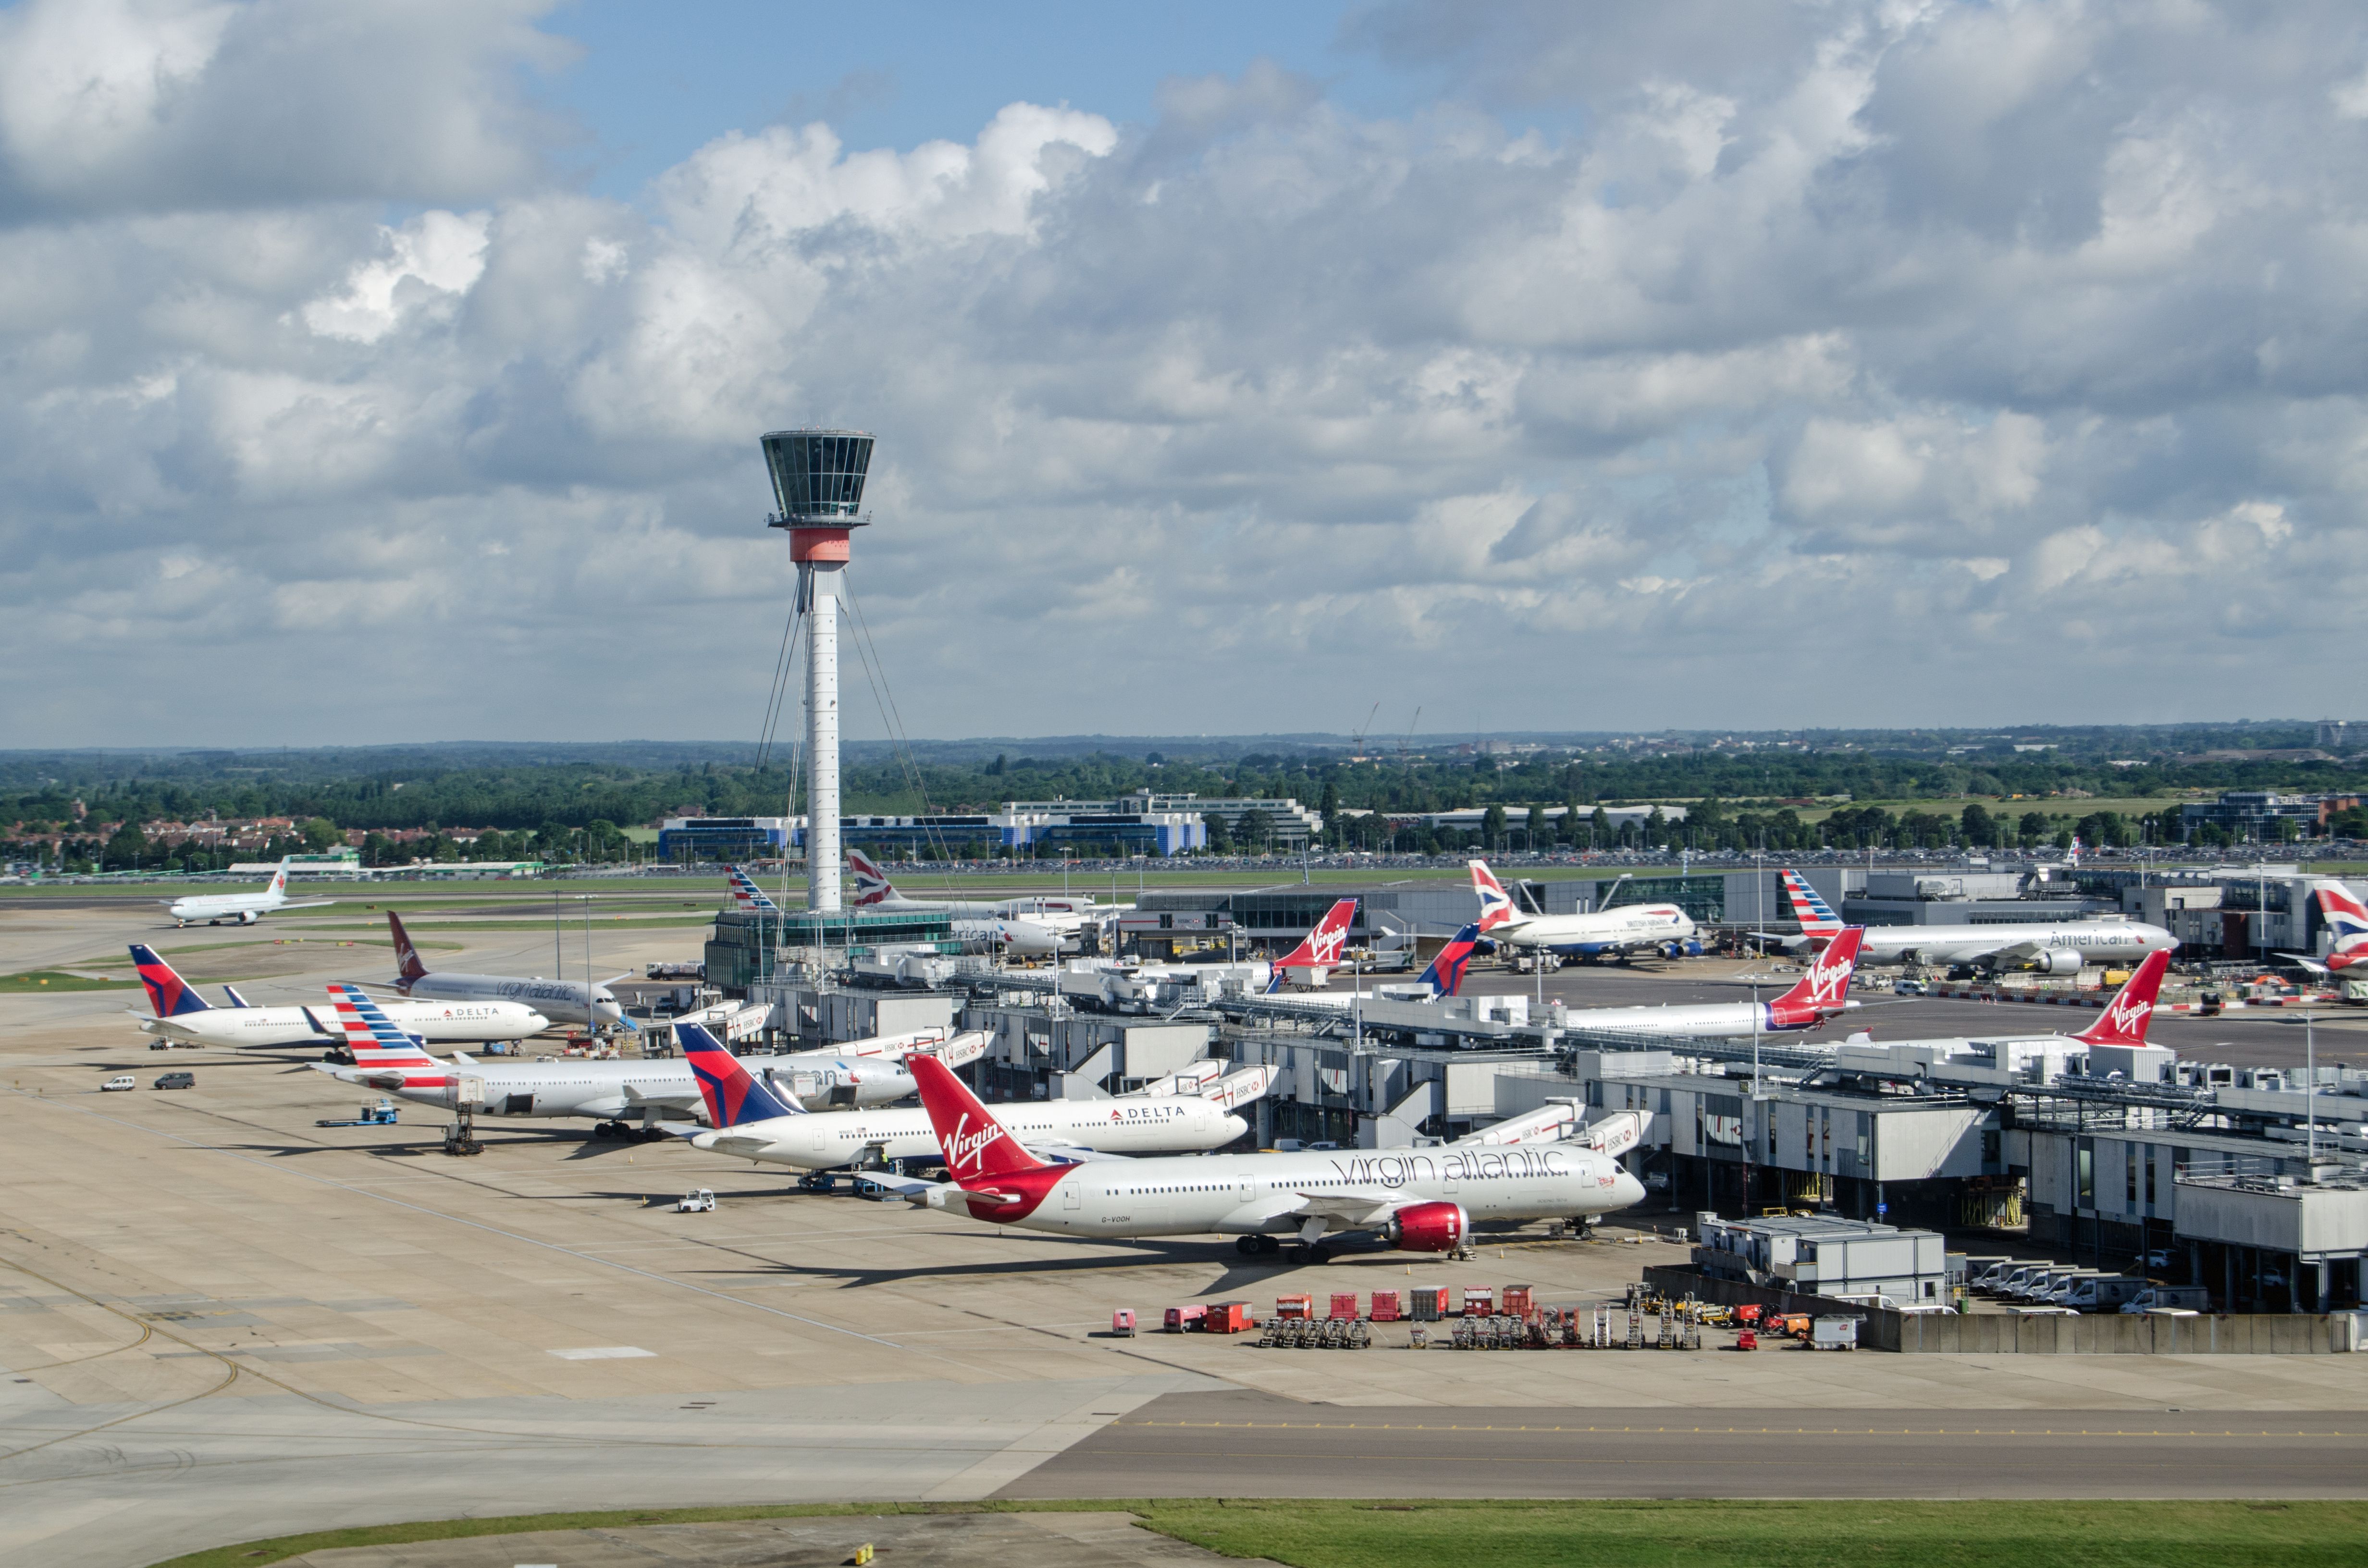 Aircraft at the gates at London Heathrow Airport LHR shutterstock_662129515